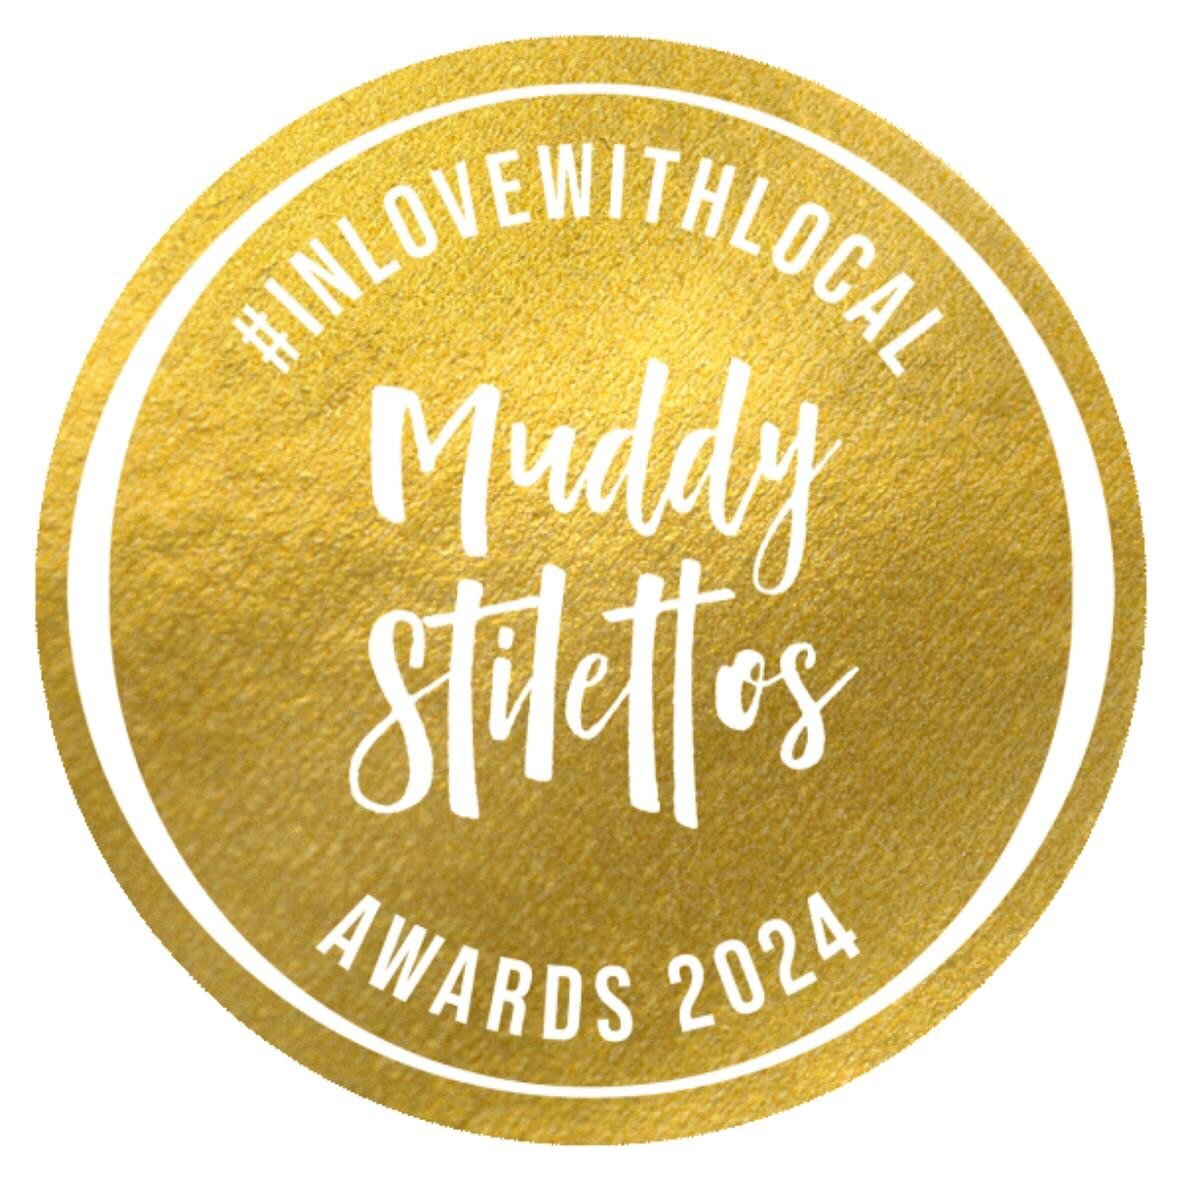 We are thrilled to announce that we have made the Regional Finals of Berkshire&rsquo;s Muddy Stilettos Awards 2024, in the Best Restaurant category. ❤️🎉

The votes start from zero again so please could we ask you to vote for us in the Best Restauran